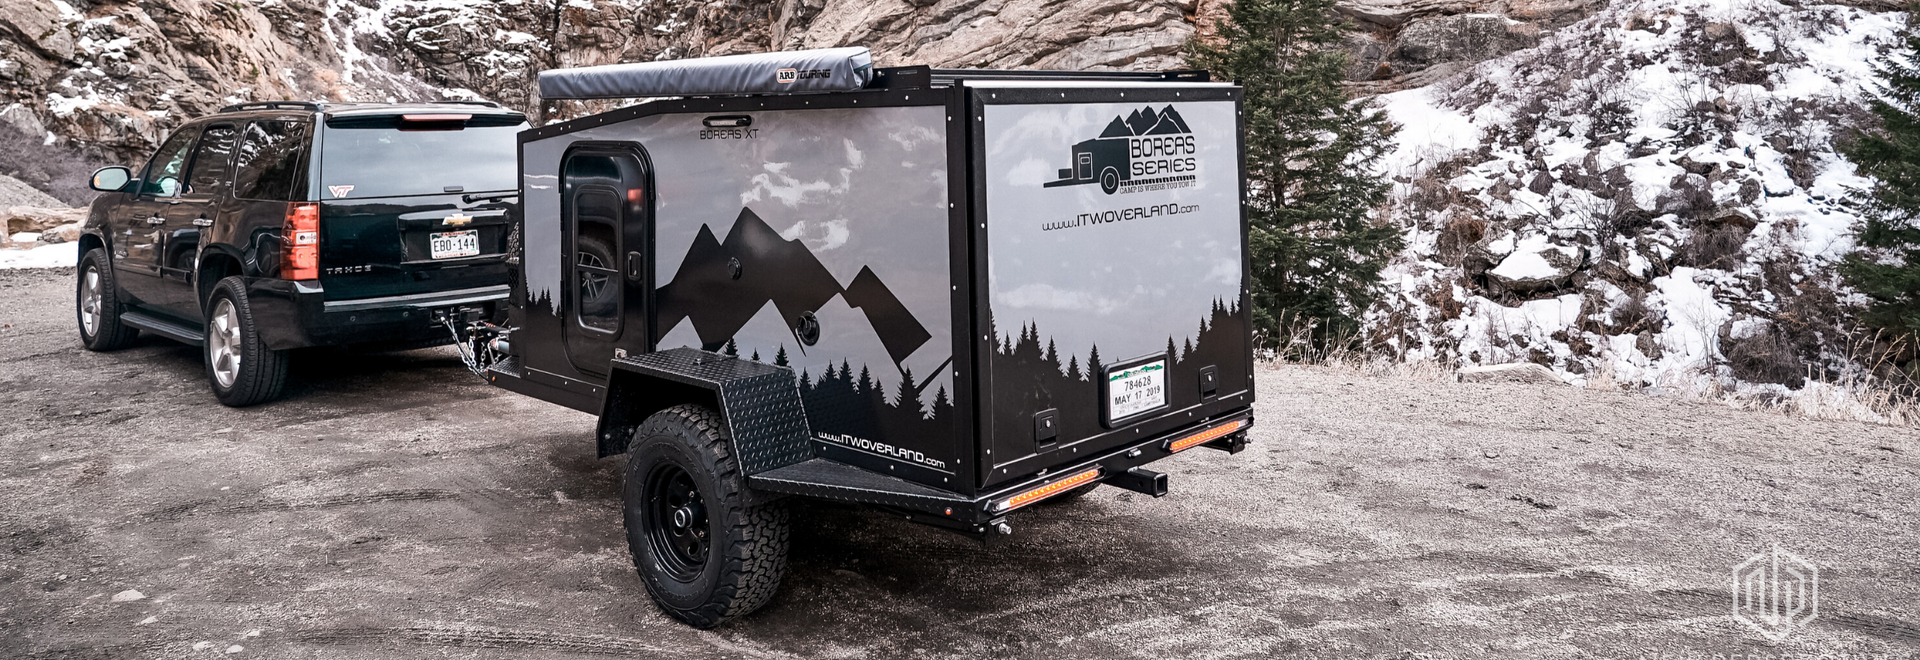 Boreas Overland Campers | Off-Road Campers For Adventure